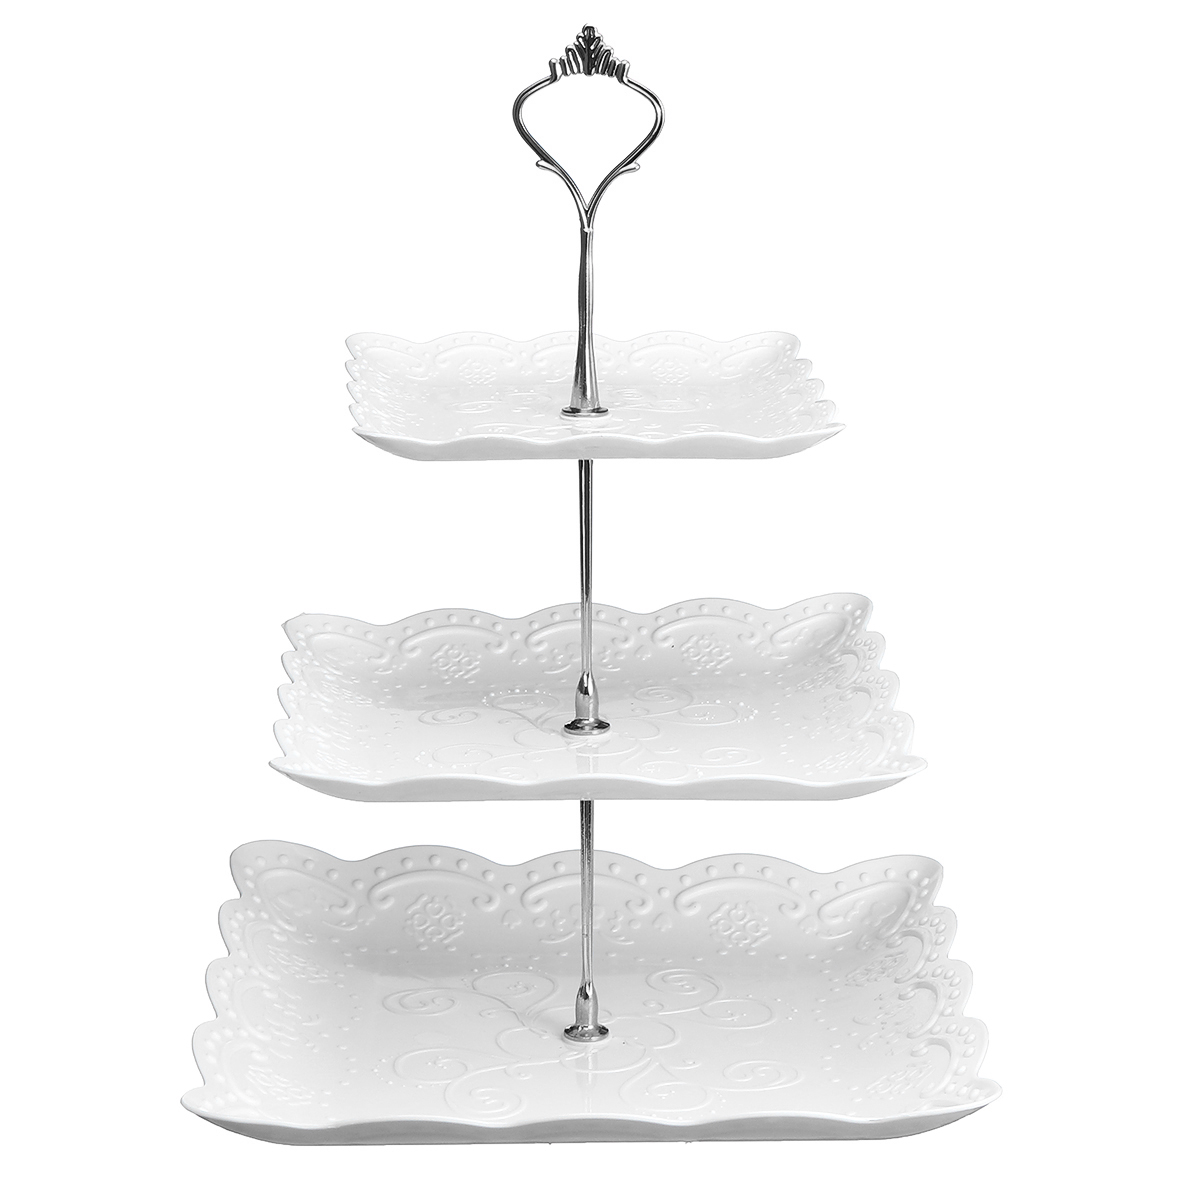 European-style-23-Tier-Fruit-Plate-Dessert-Tray-Cake-Table-Multi-layer-Cake-Stand-Cake-Setting-Table-1926348-13